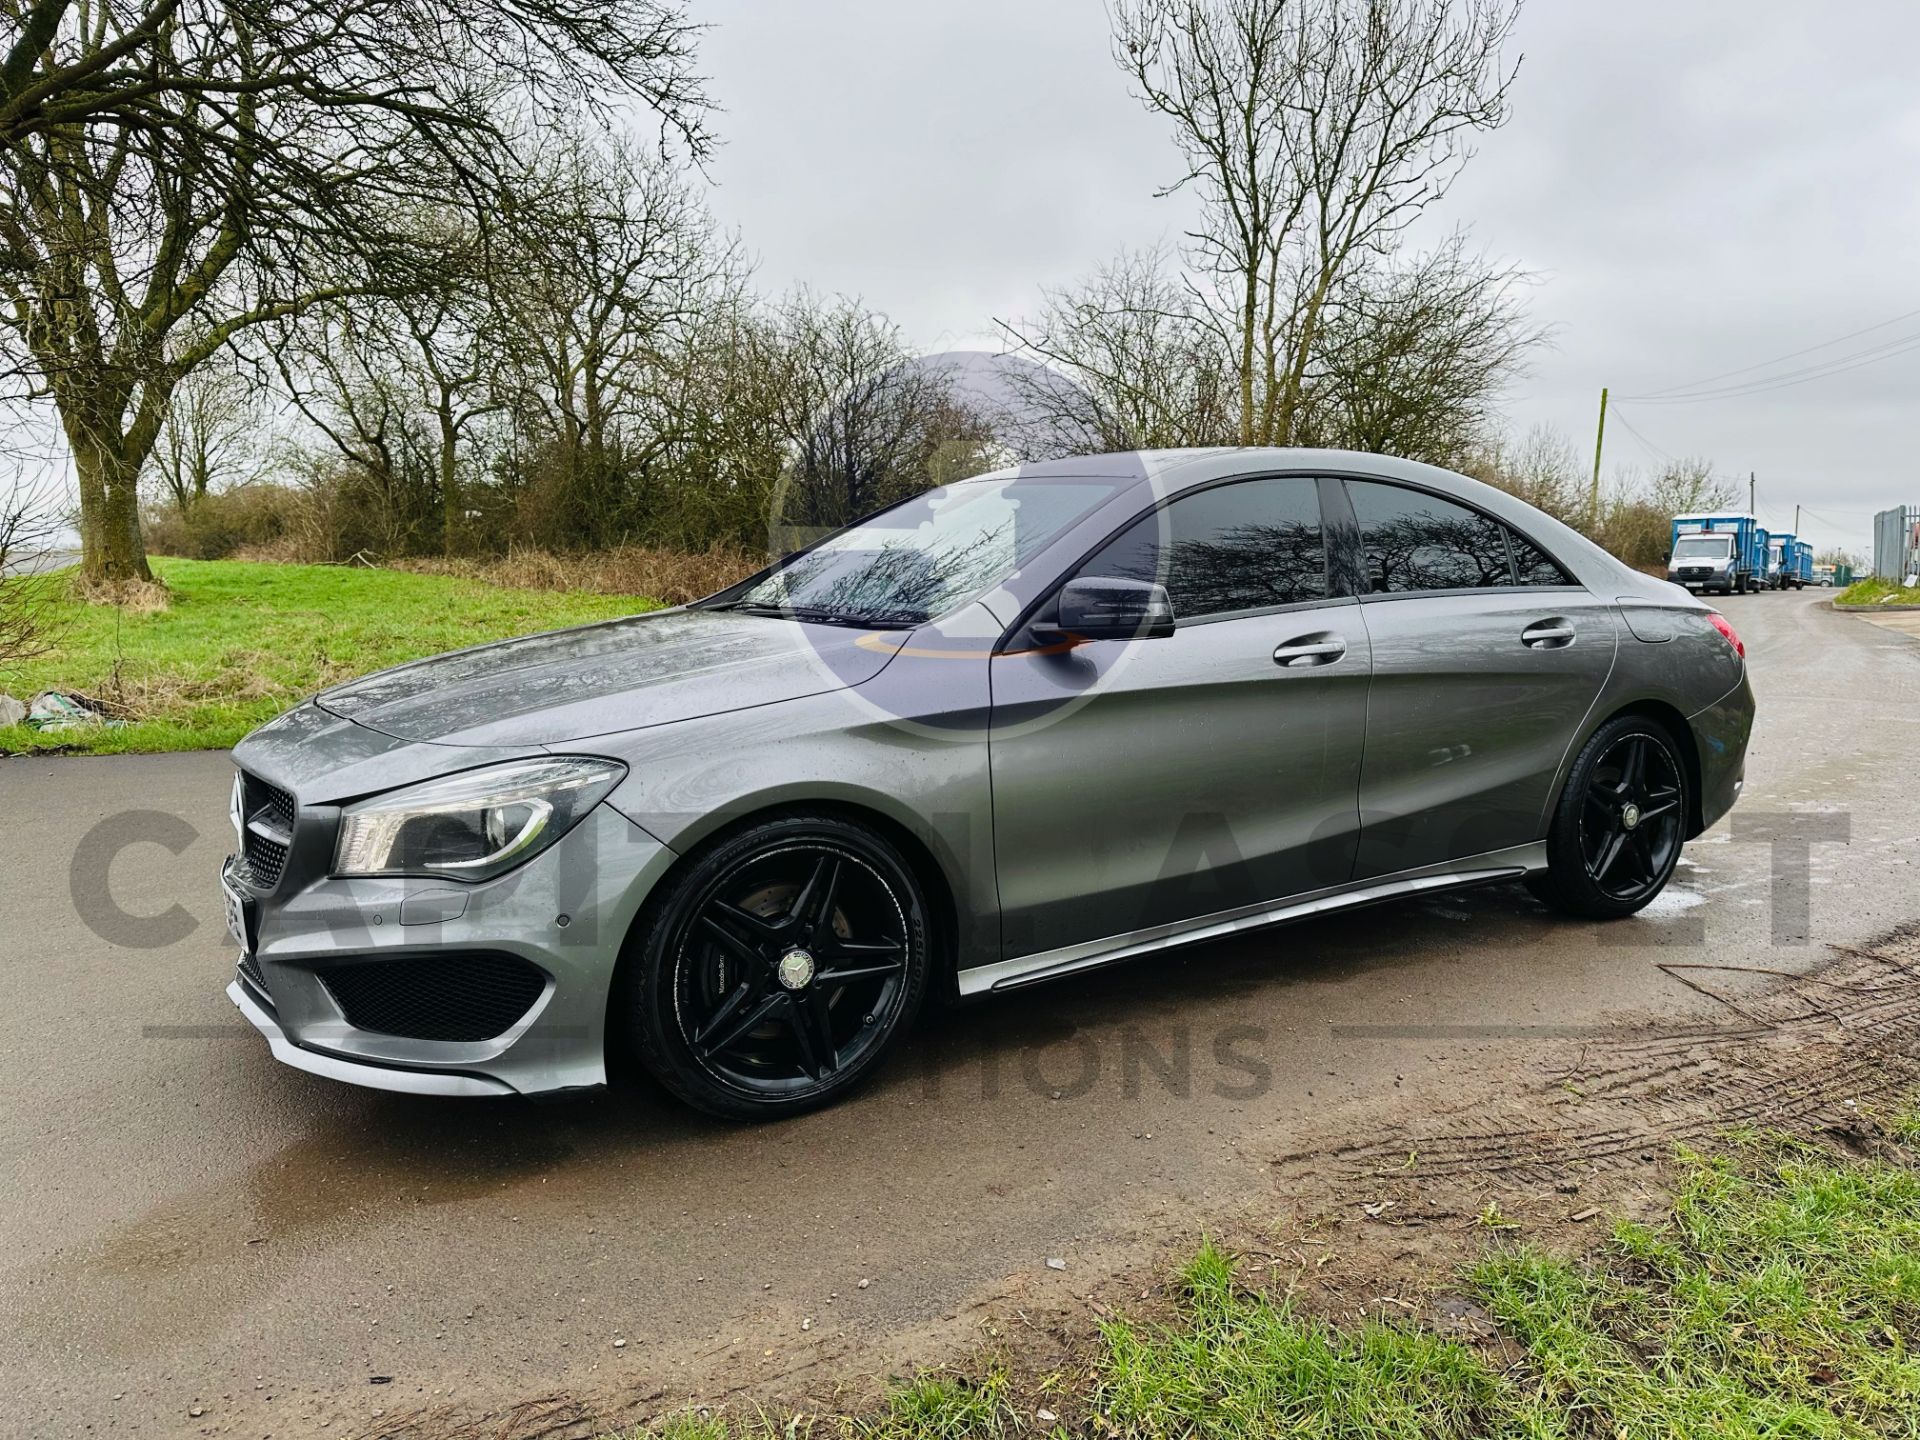 (ON SALE) MERCEDES-BENZ CLA 220 CDI *AMG SPORT* (7G - DCT AUTOMATIC) - 2015 MODEL - SERVICE HISTORY - Image 5 of 33